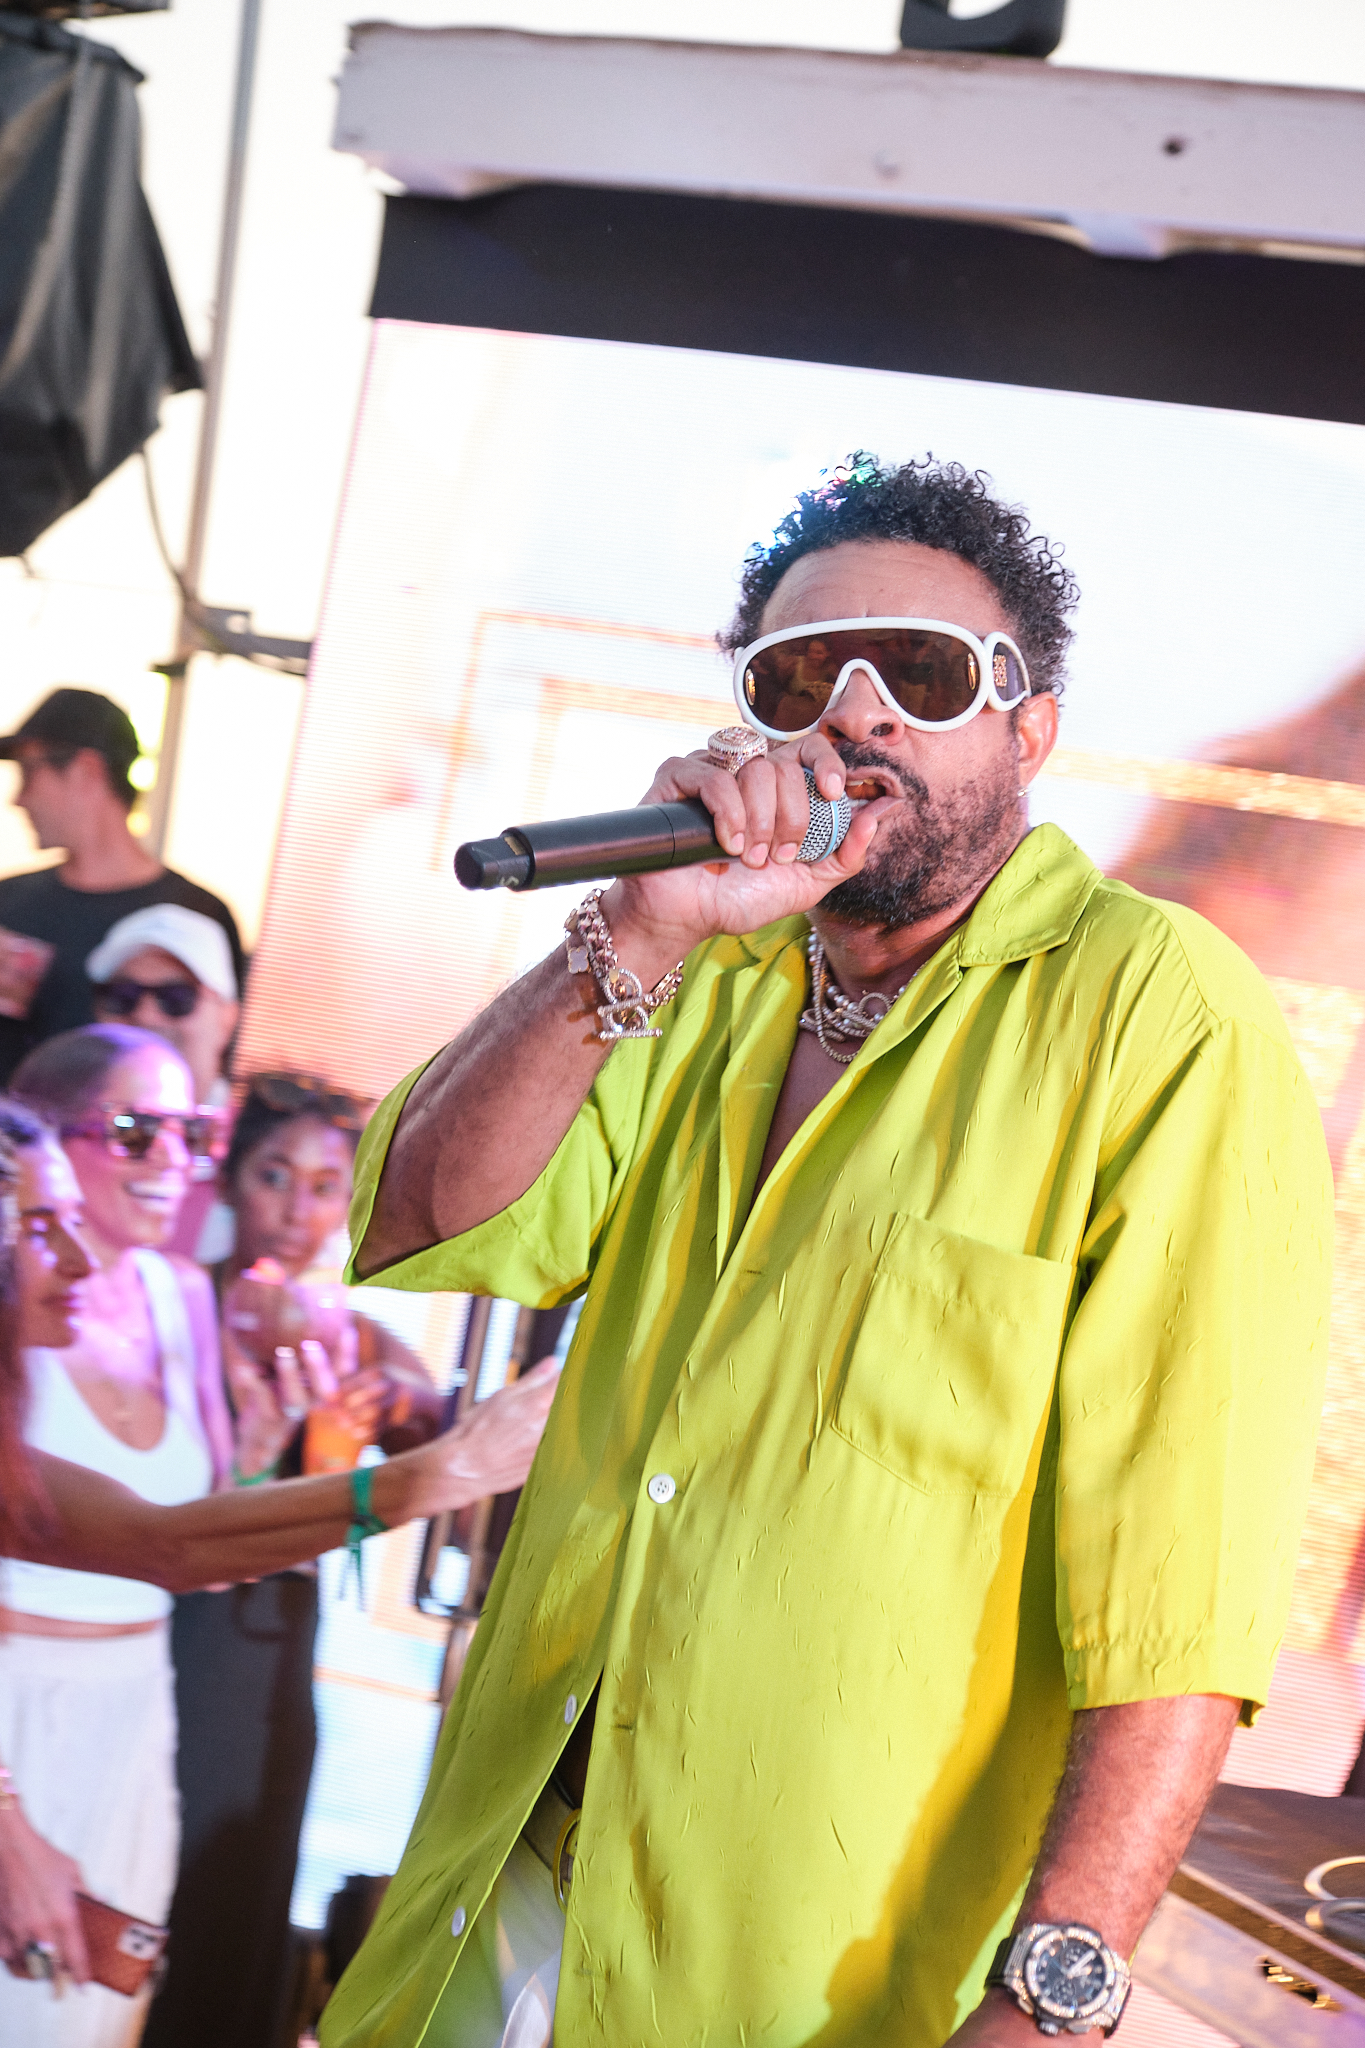 DJ Cassidy, Shaggy and Wyclef Jean perform at The Surf Lodge in Montauk over Labor Day weekend for a summer celebration with MALIBU rum